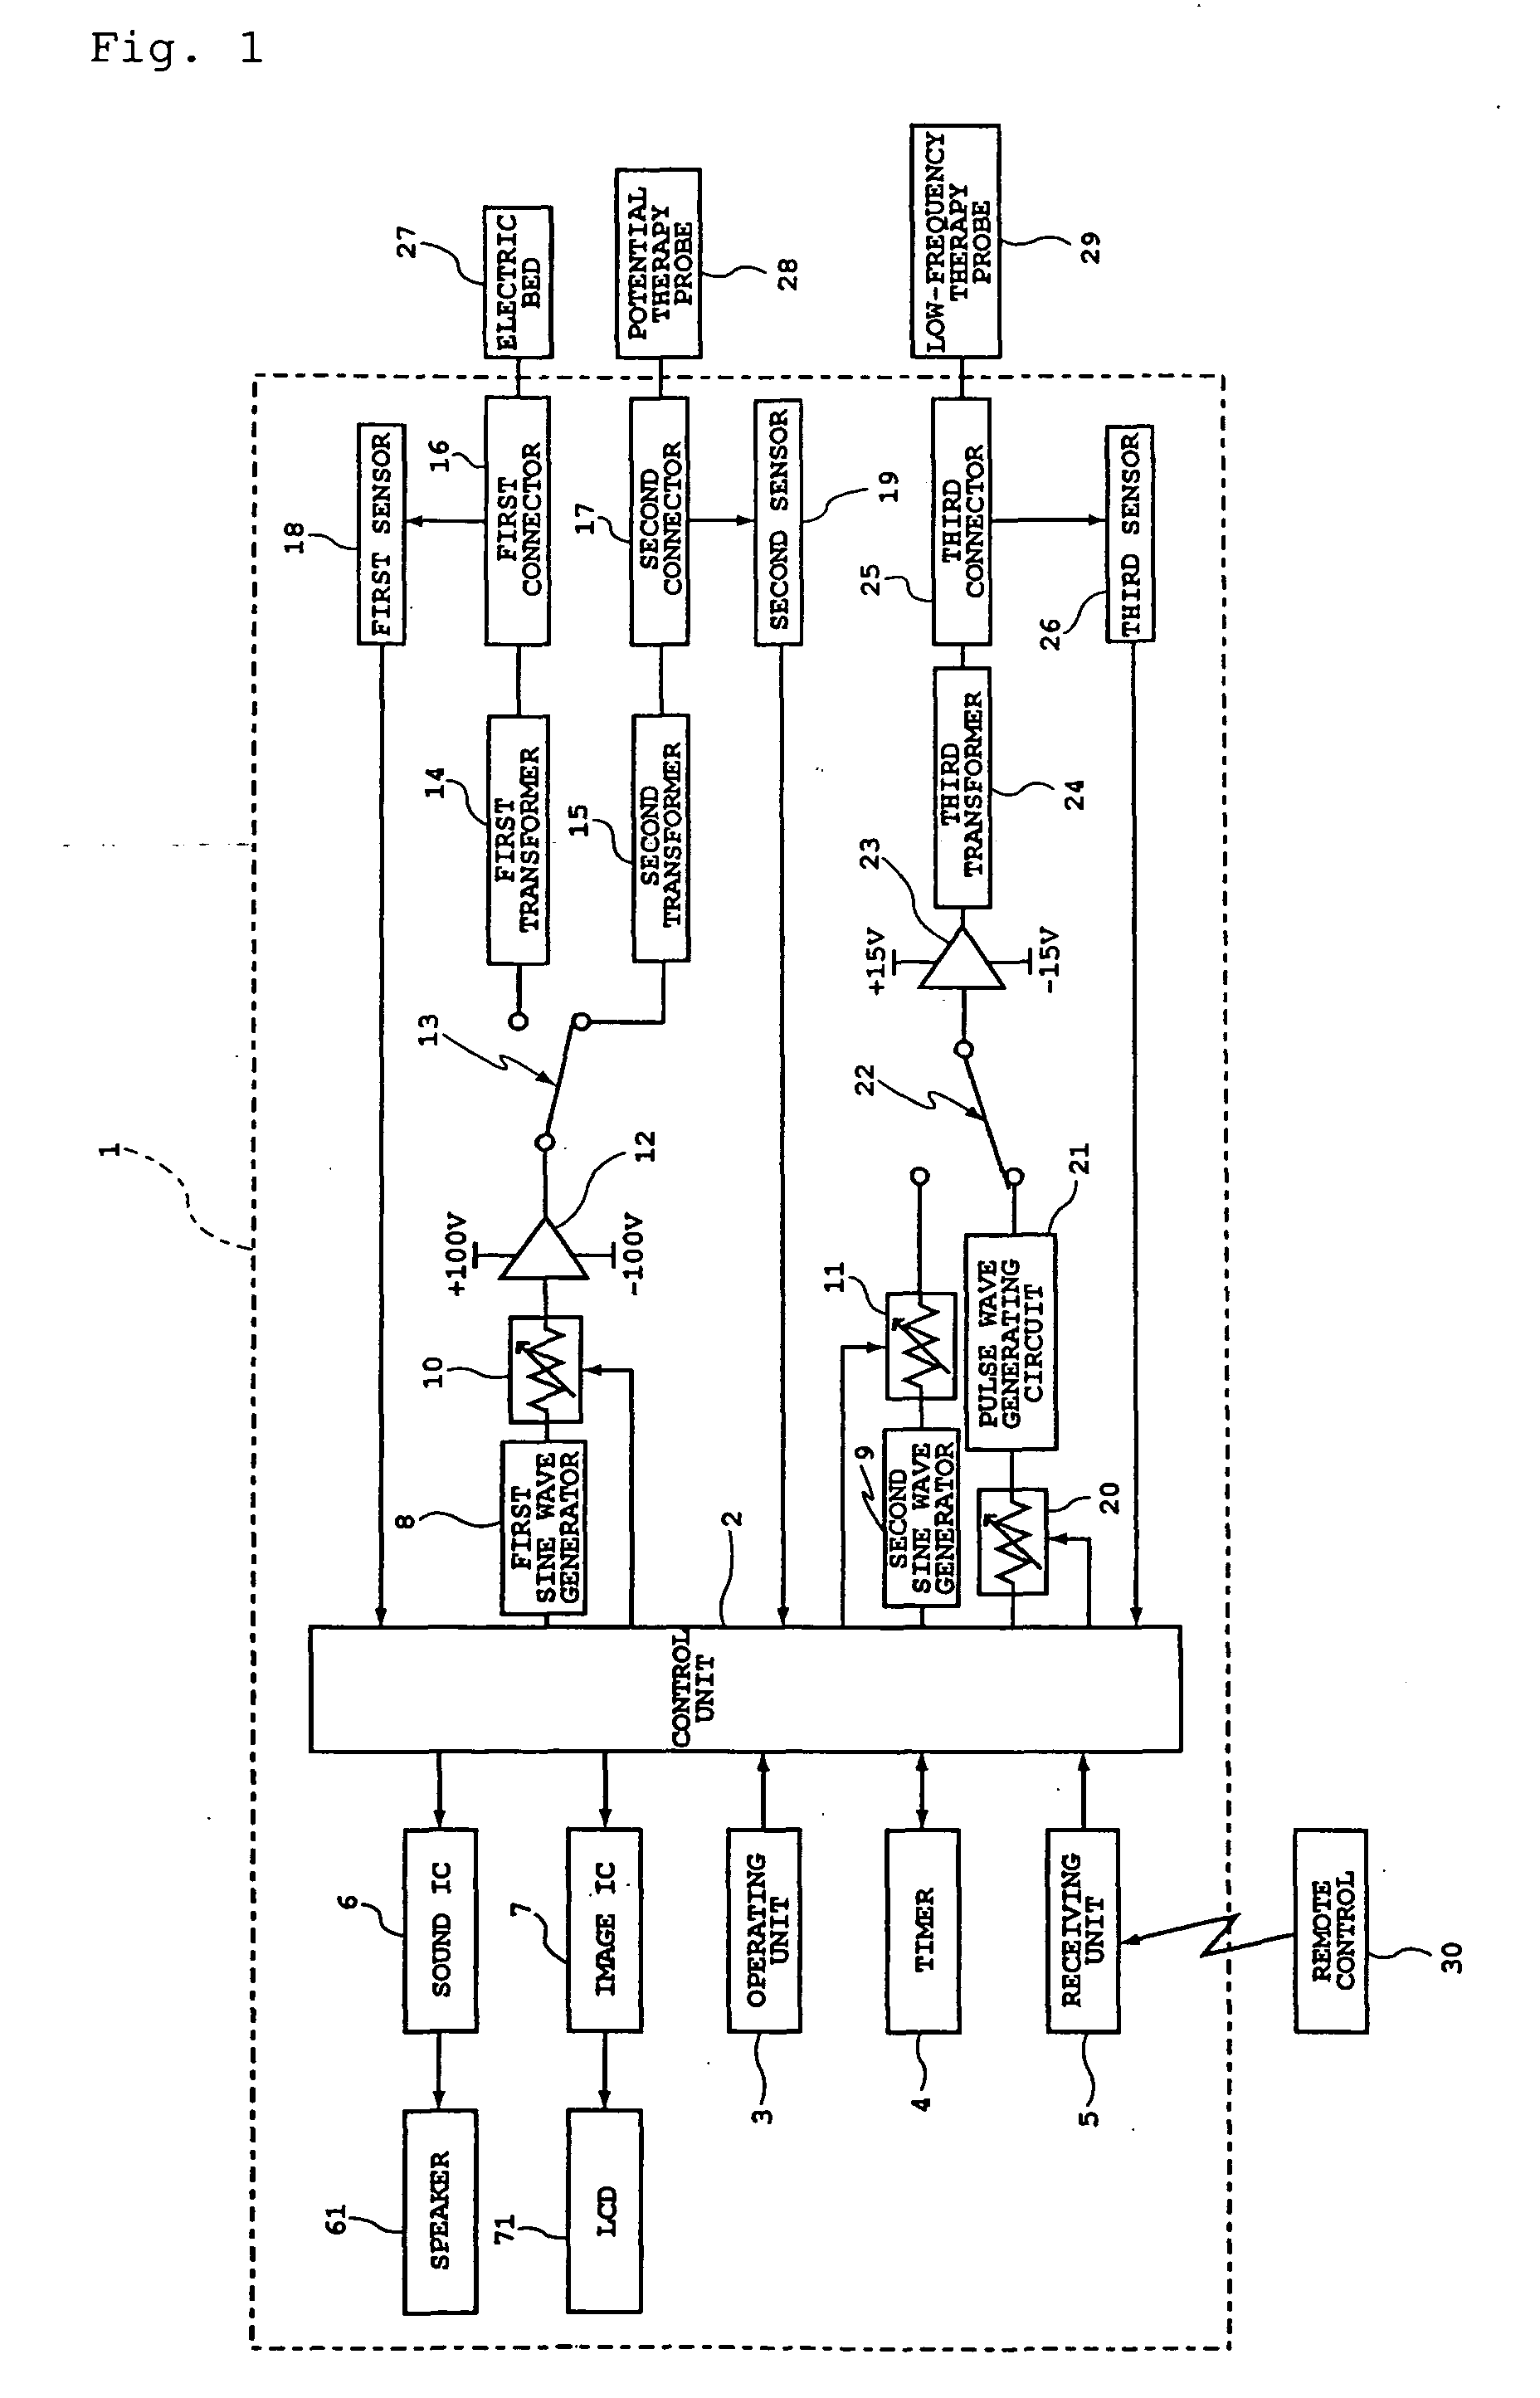 Potential therapy apparatus and combined electric therapy apparatus